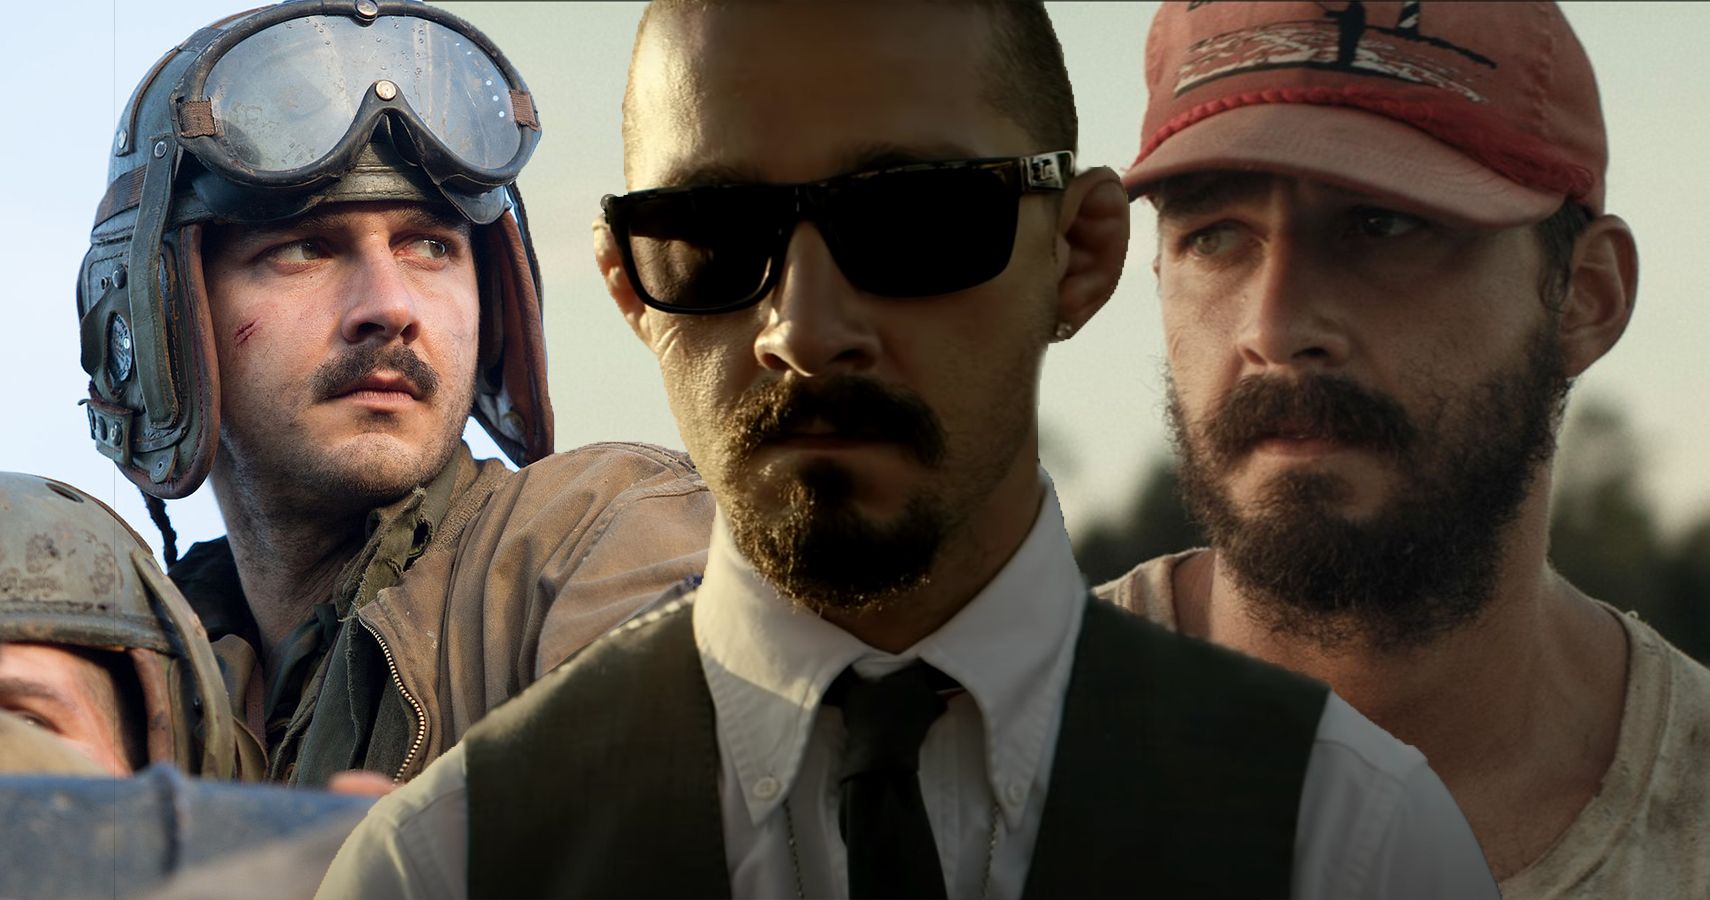 Shia LaBeouf His 5 Highest Ranked Roles (& His 5 Lowest) According To IMDb